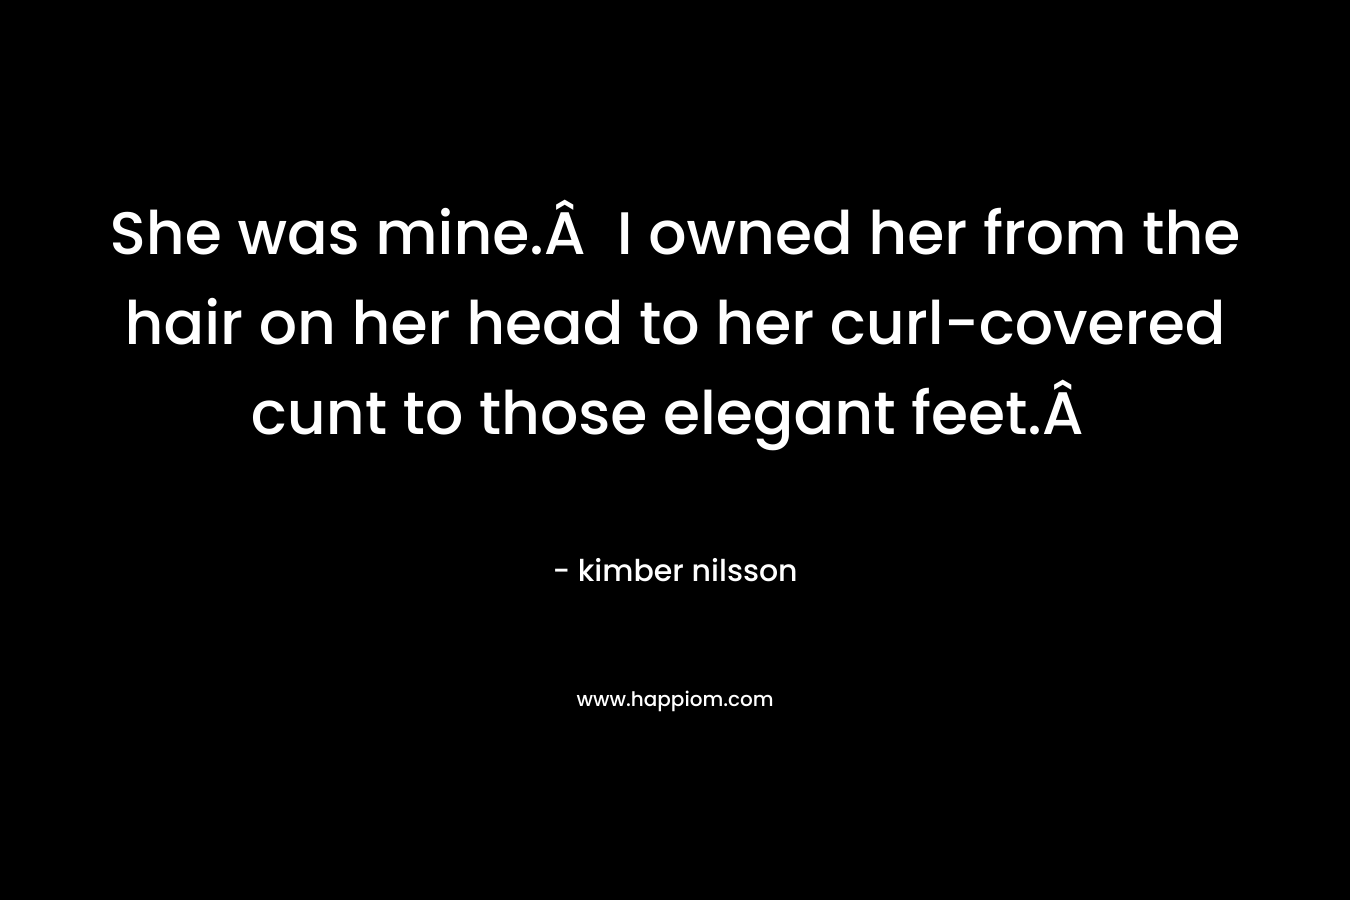 She was mine.Â  I owned her from the hair on her head to her curl-covered cunt to those elegant feet.Â  – kimber nilsson